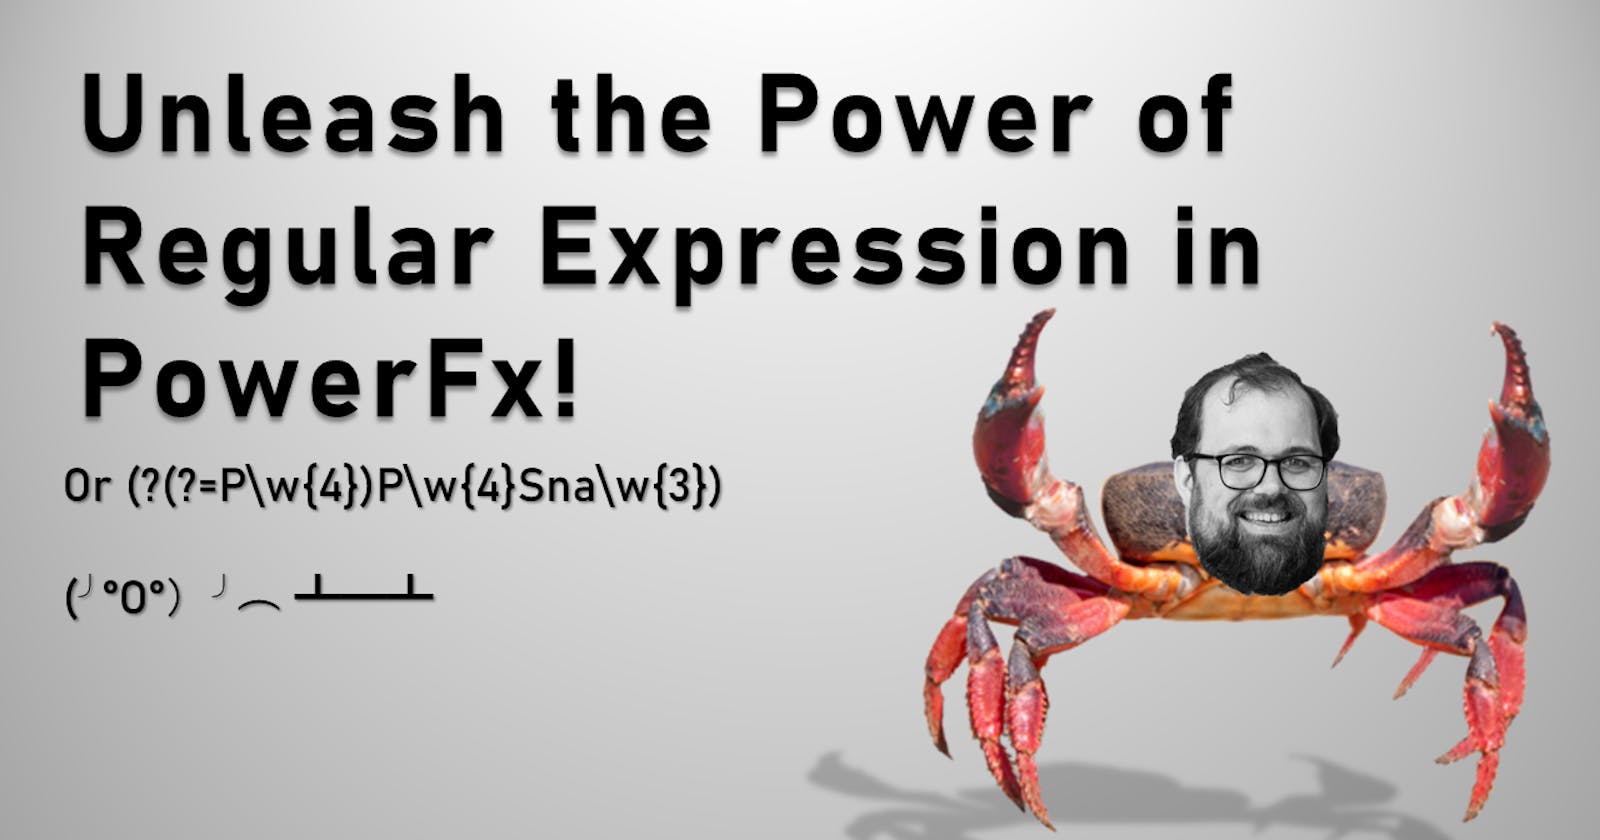 Unleash the Power of Regular Expression in PowerFx!